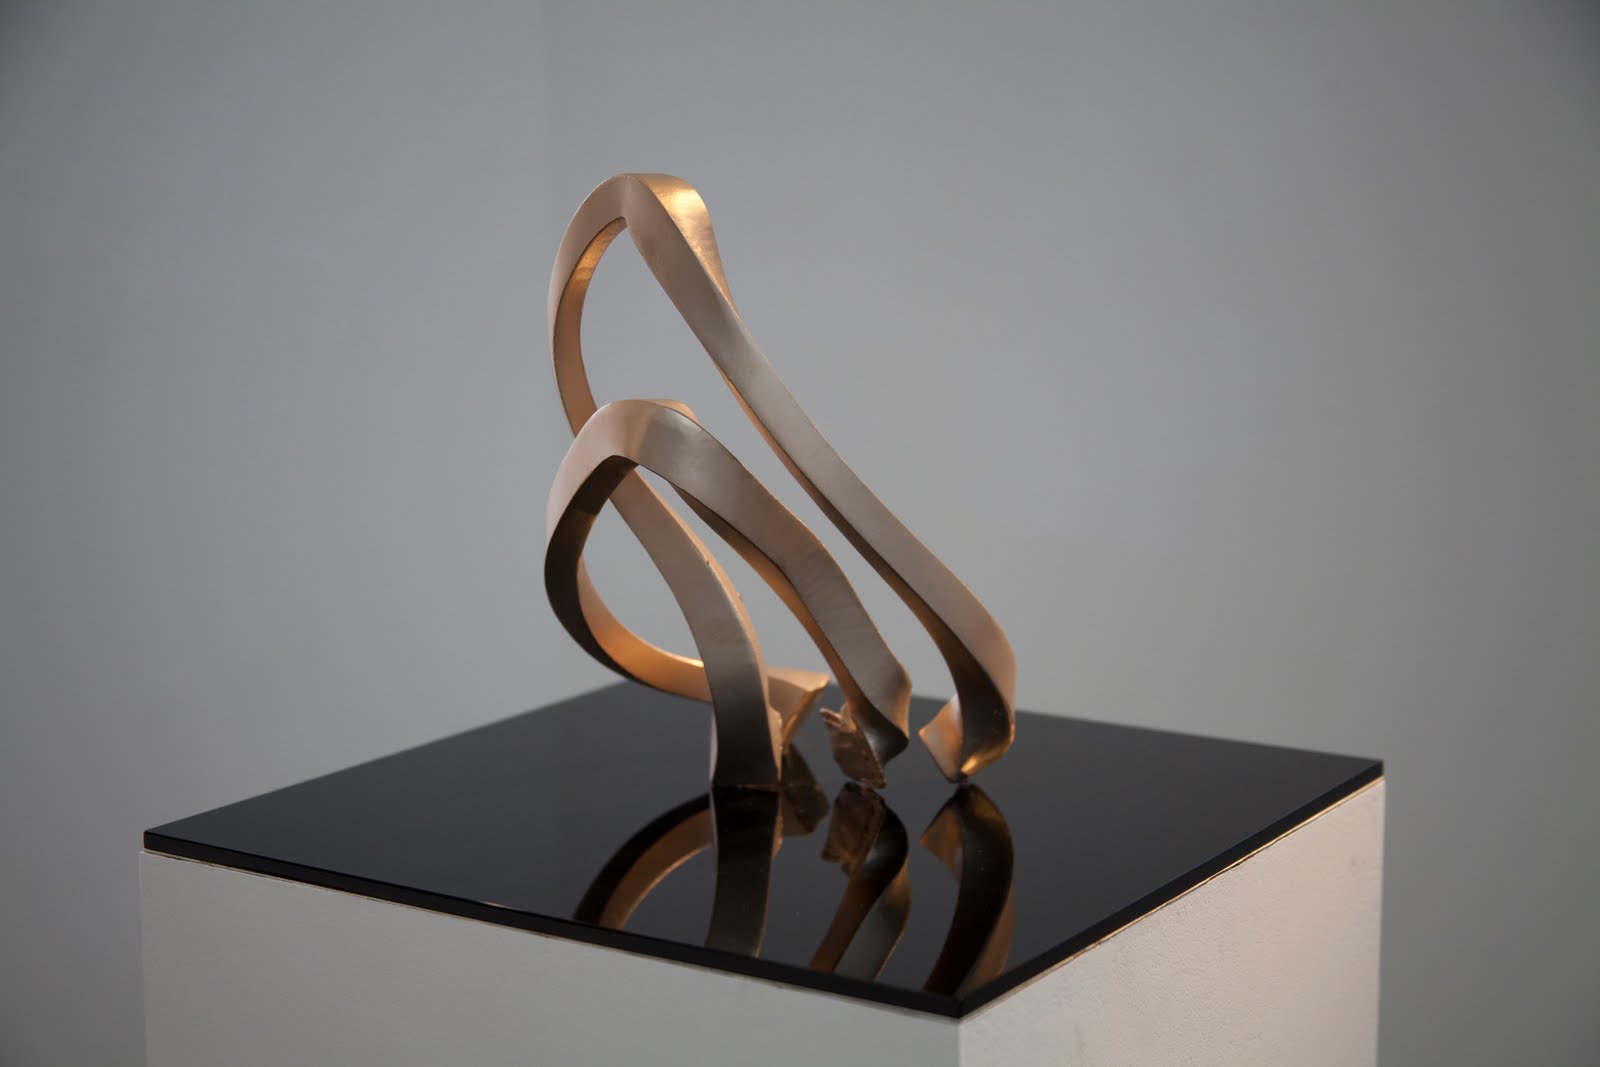 Sculptures made with motion capture, 3D printing, and bronze casting